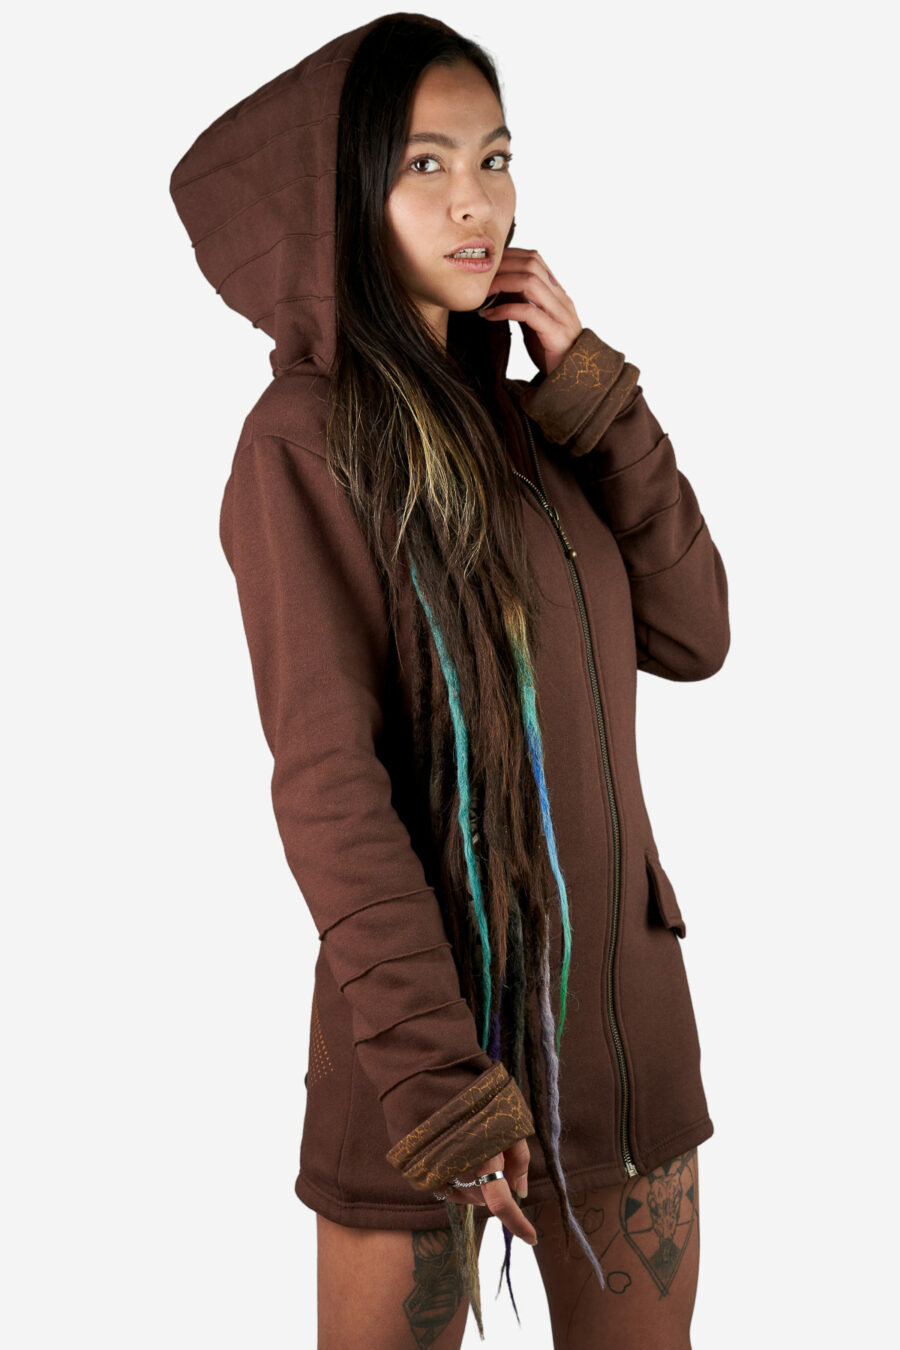 zola-thora-hoodie-brown-for-women-with-handmade-screen-print-alternative-streetwear-and-festival-fashion-avanyah-clothing